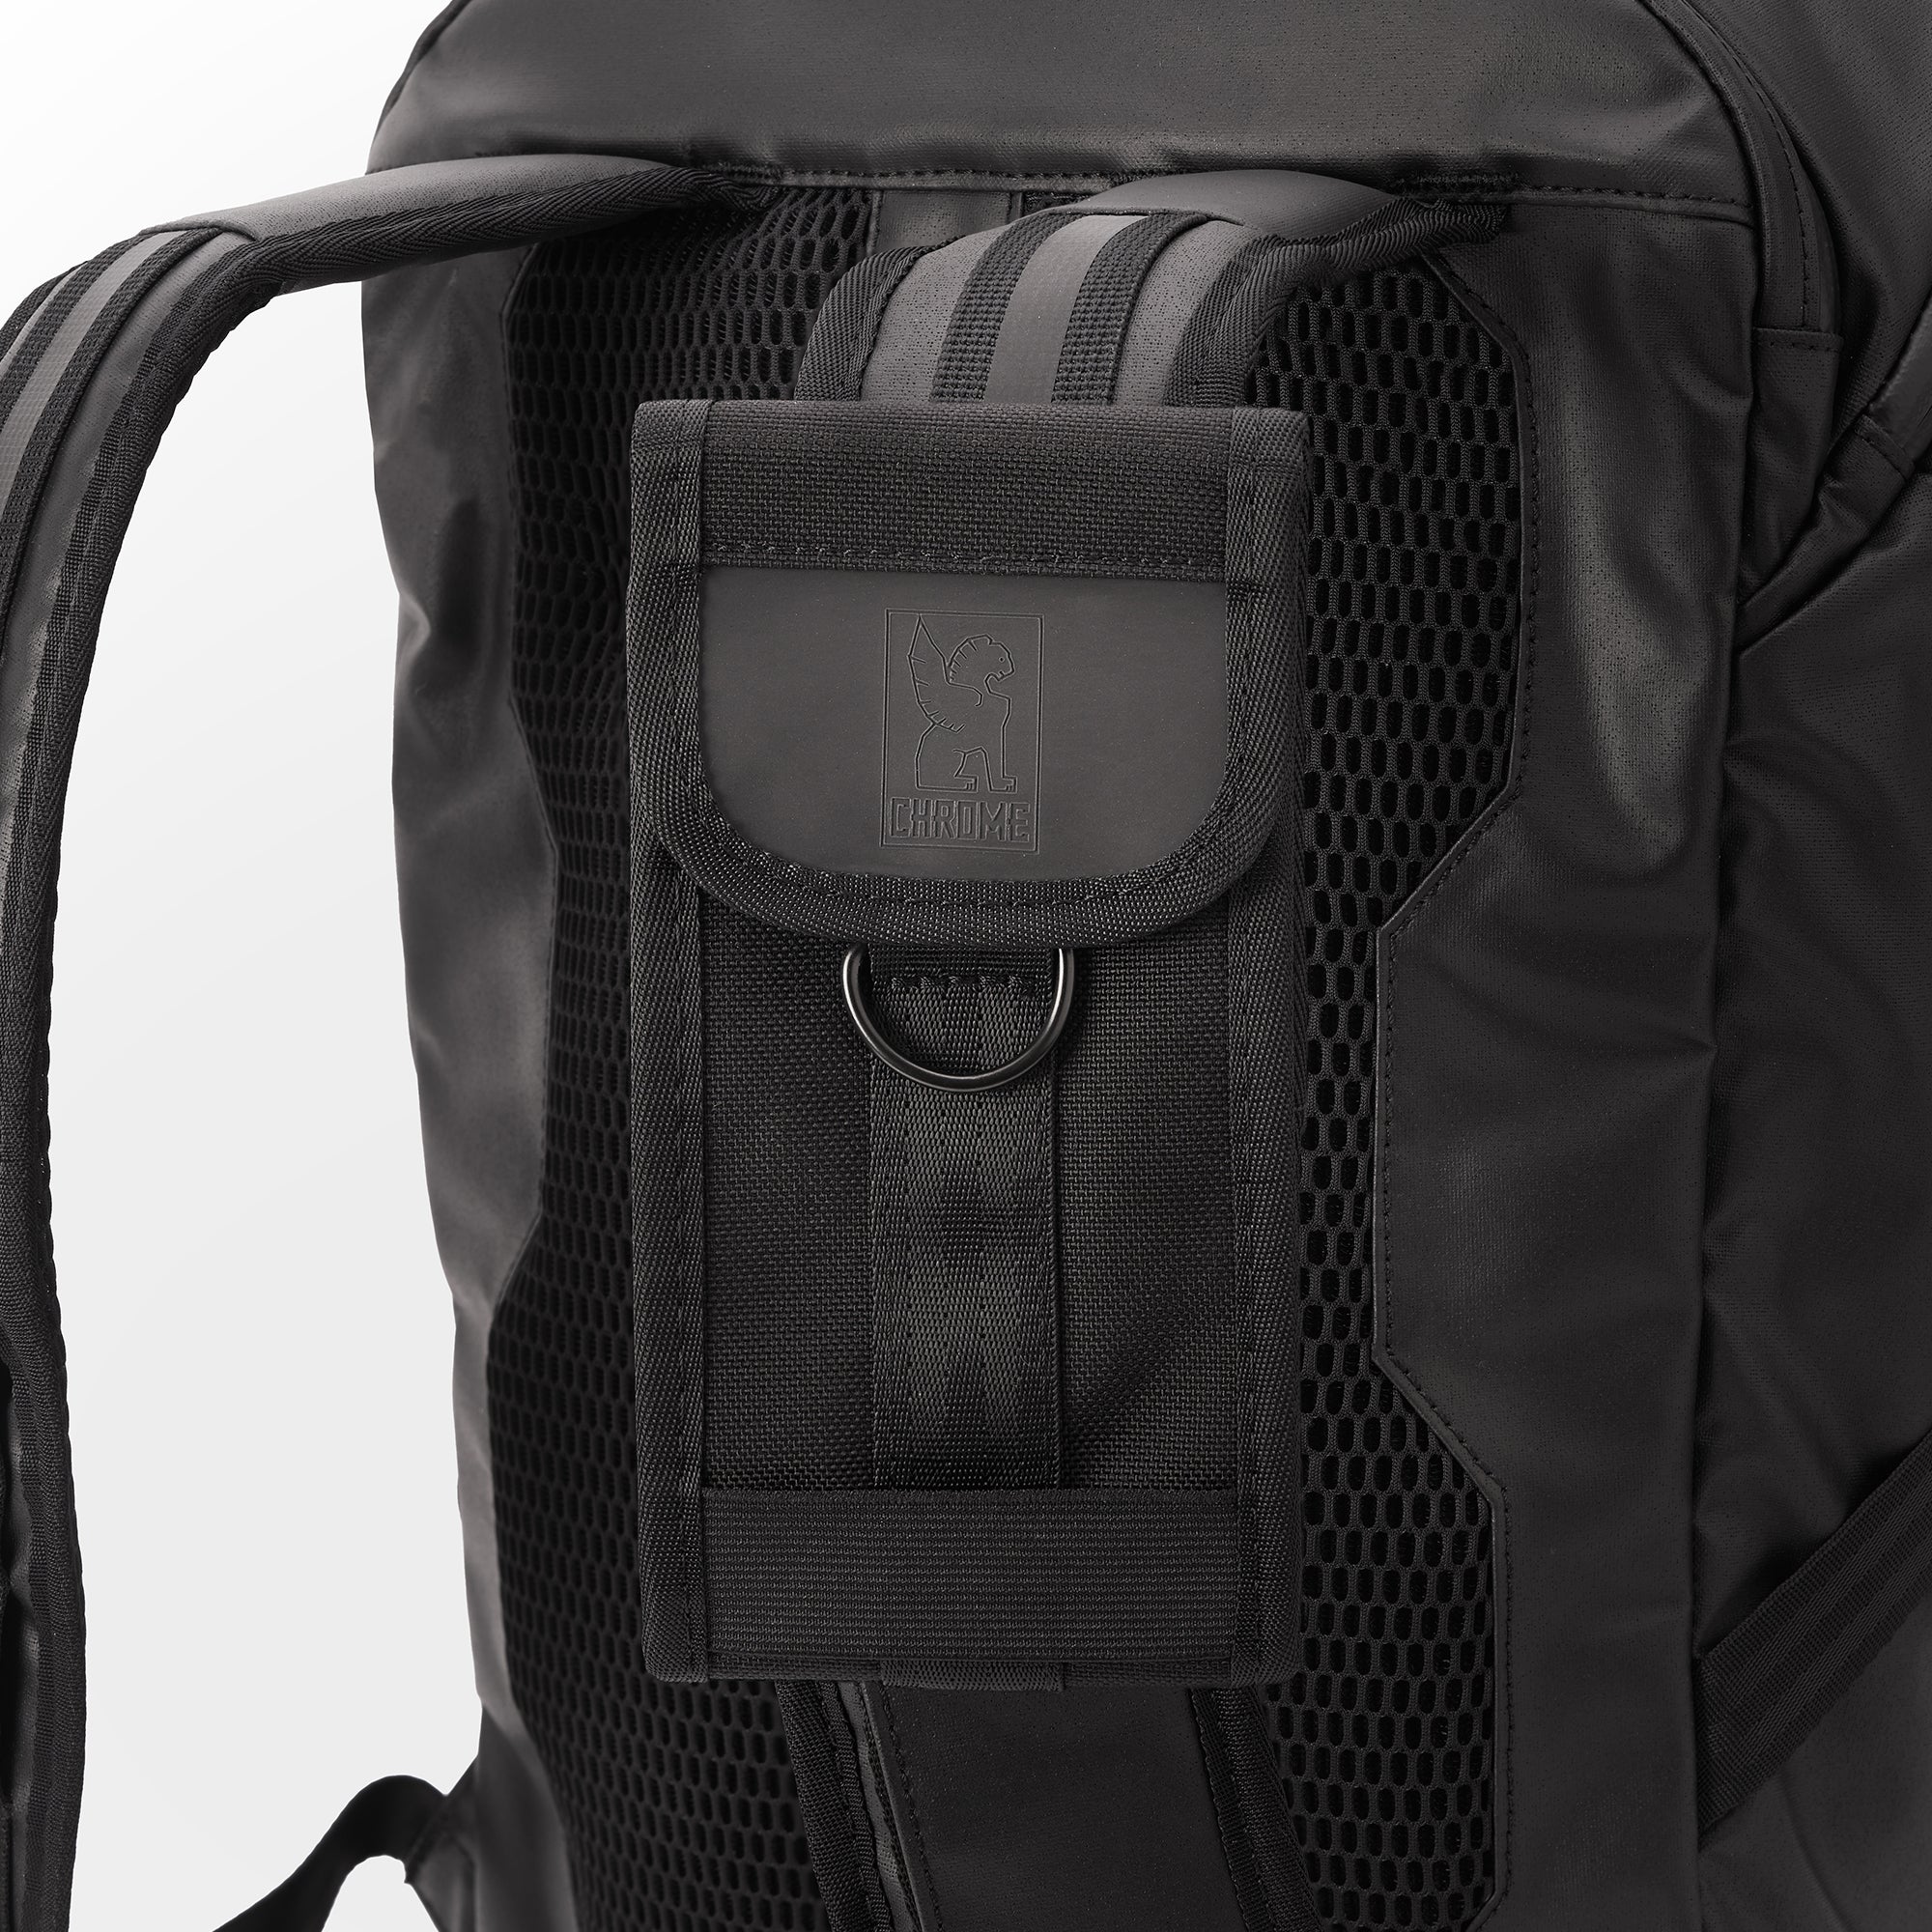 Large Phone Pouch in black attached to a backpack strap